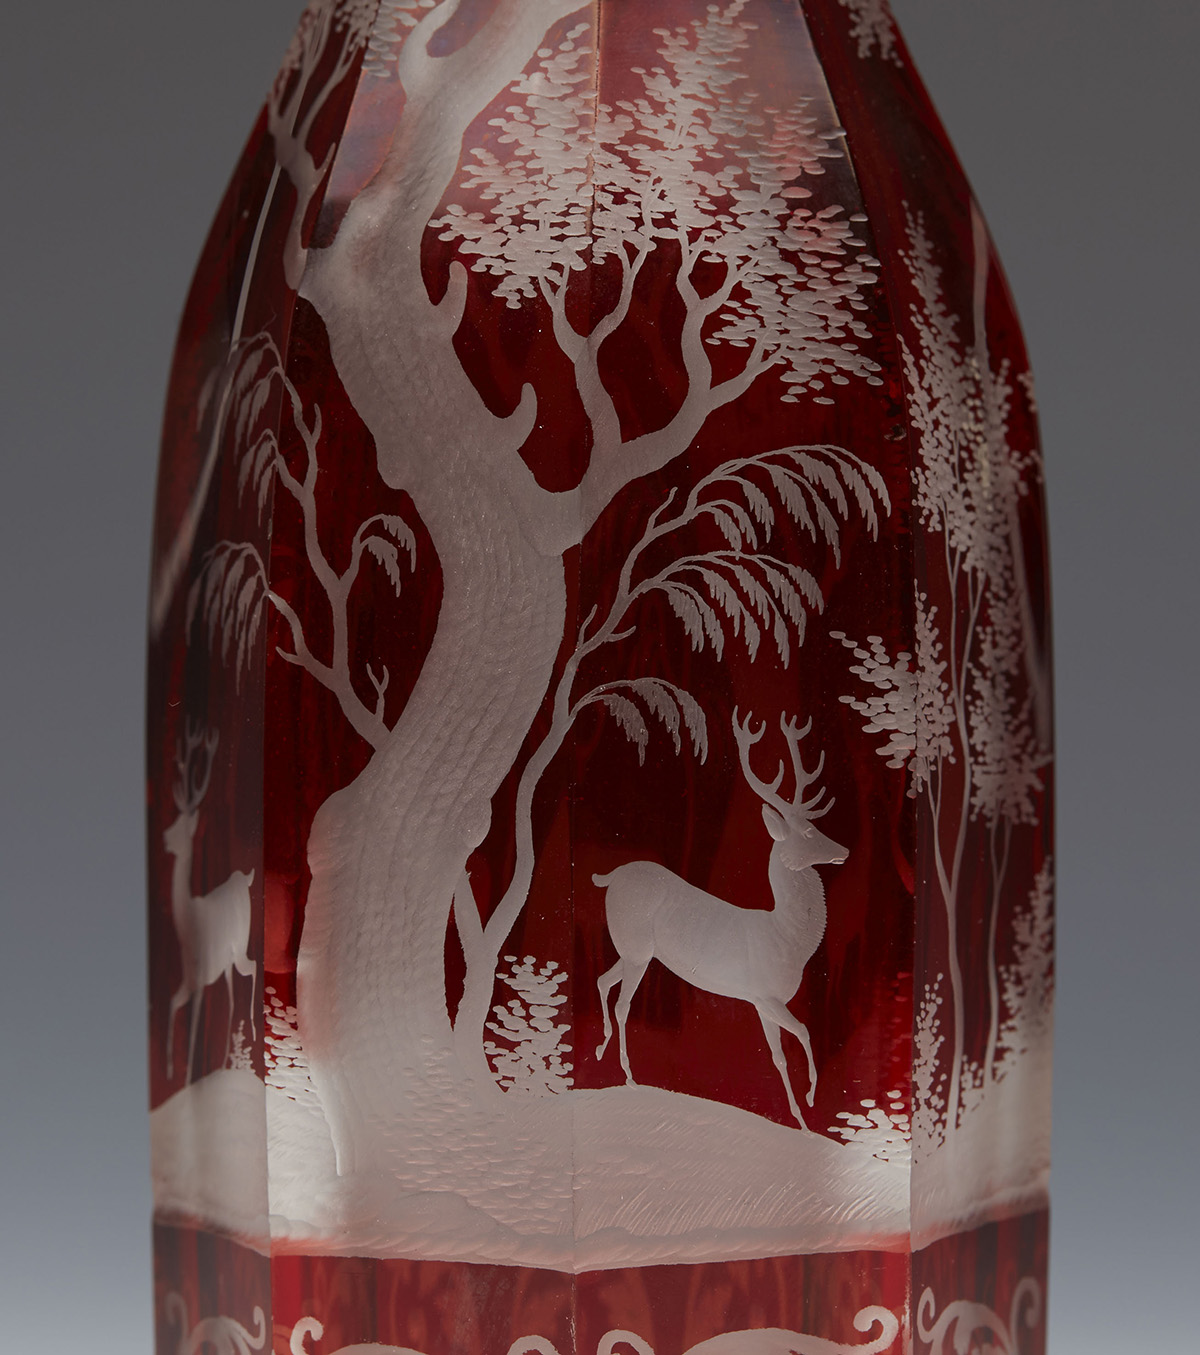 ANTIQUE BOHEMIAN RUBY ACID ETCHED SPIRIT DECANTER 19TH C. - Image 7 of 8